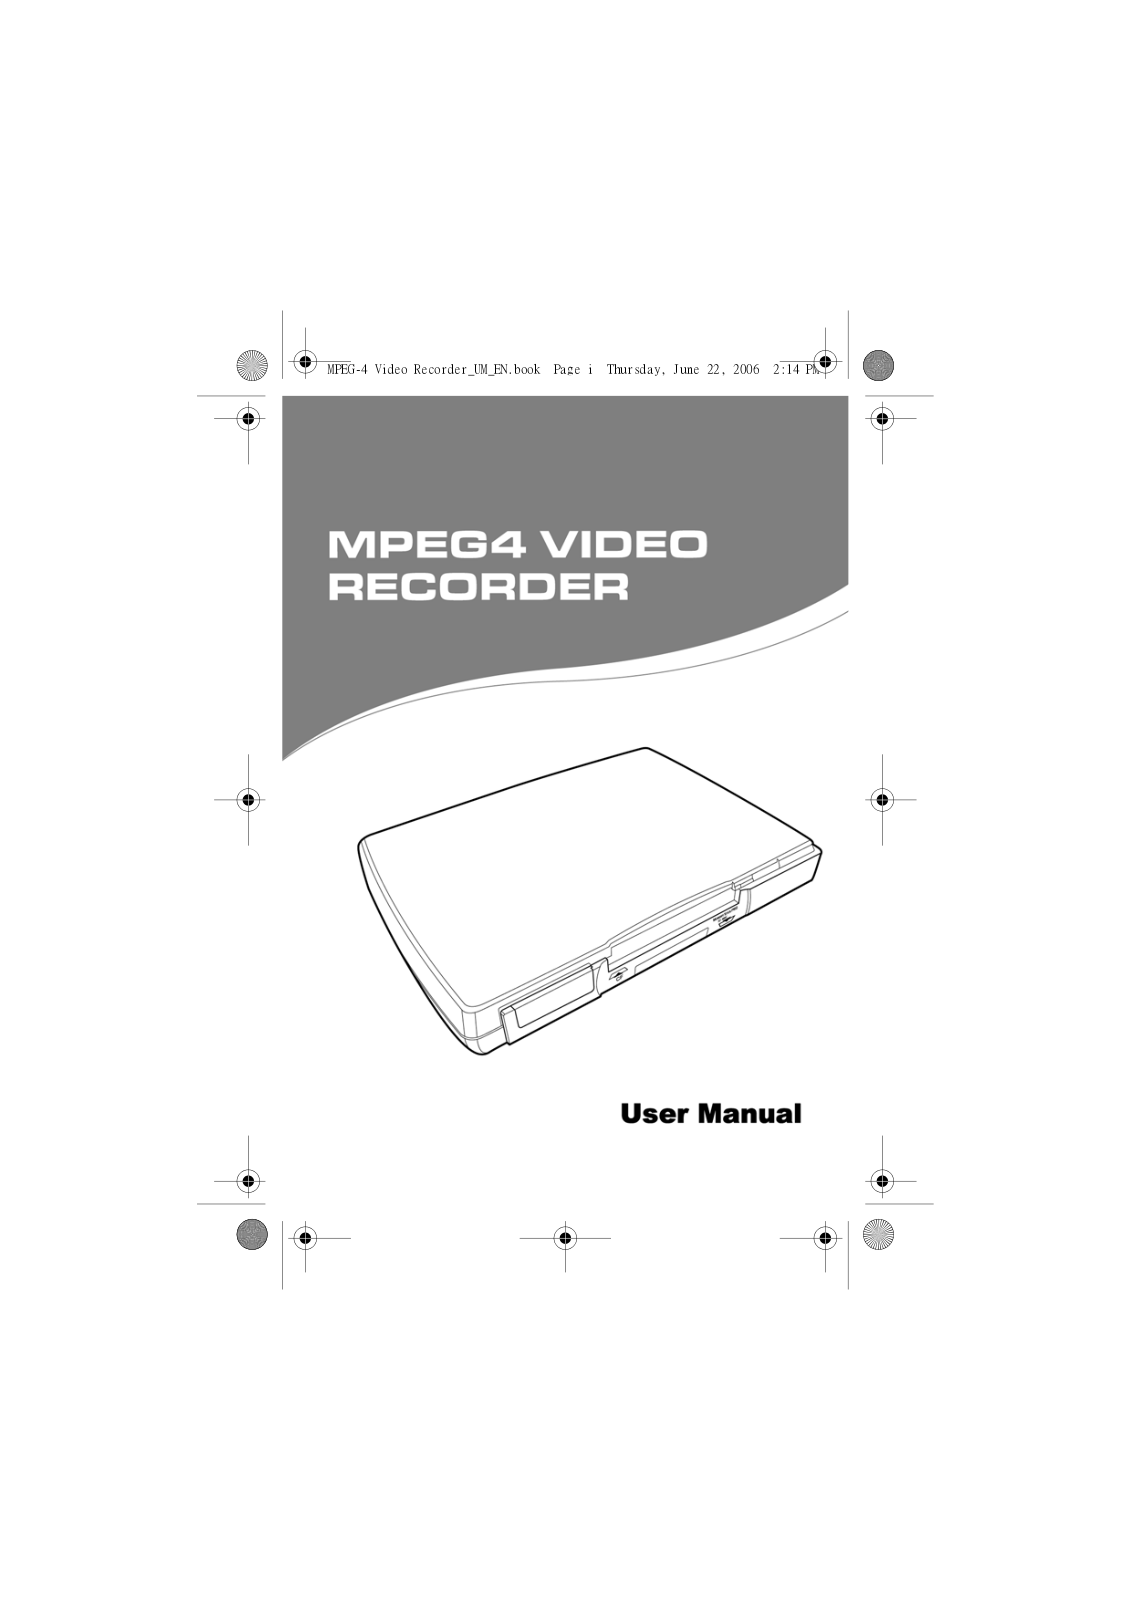 Sony MPEG4 Video Recorder User Manual